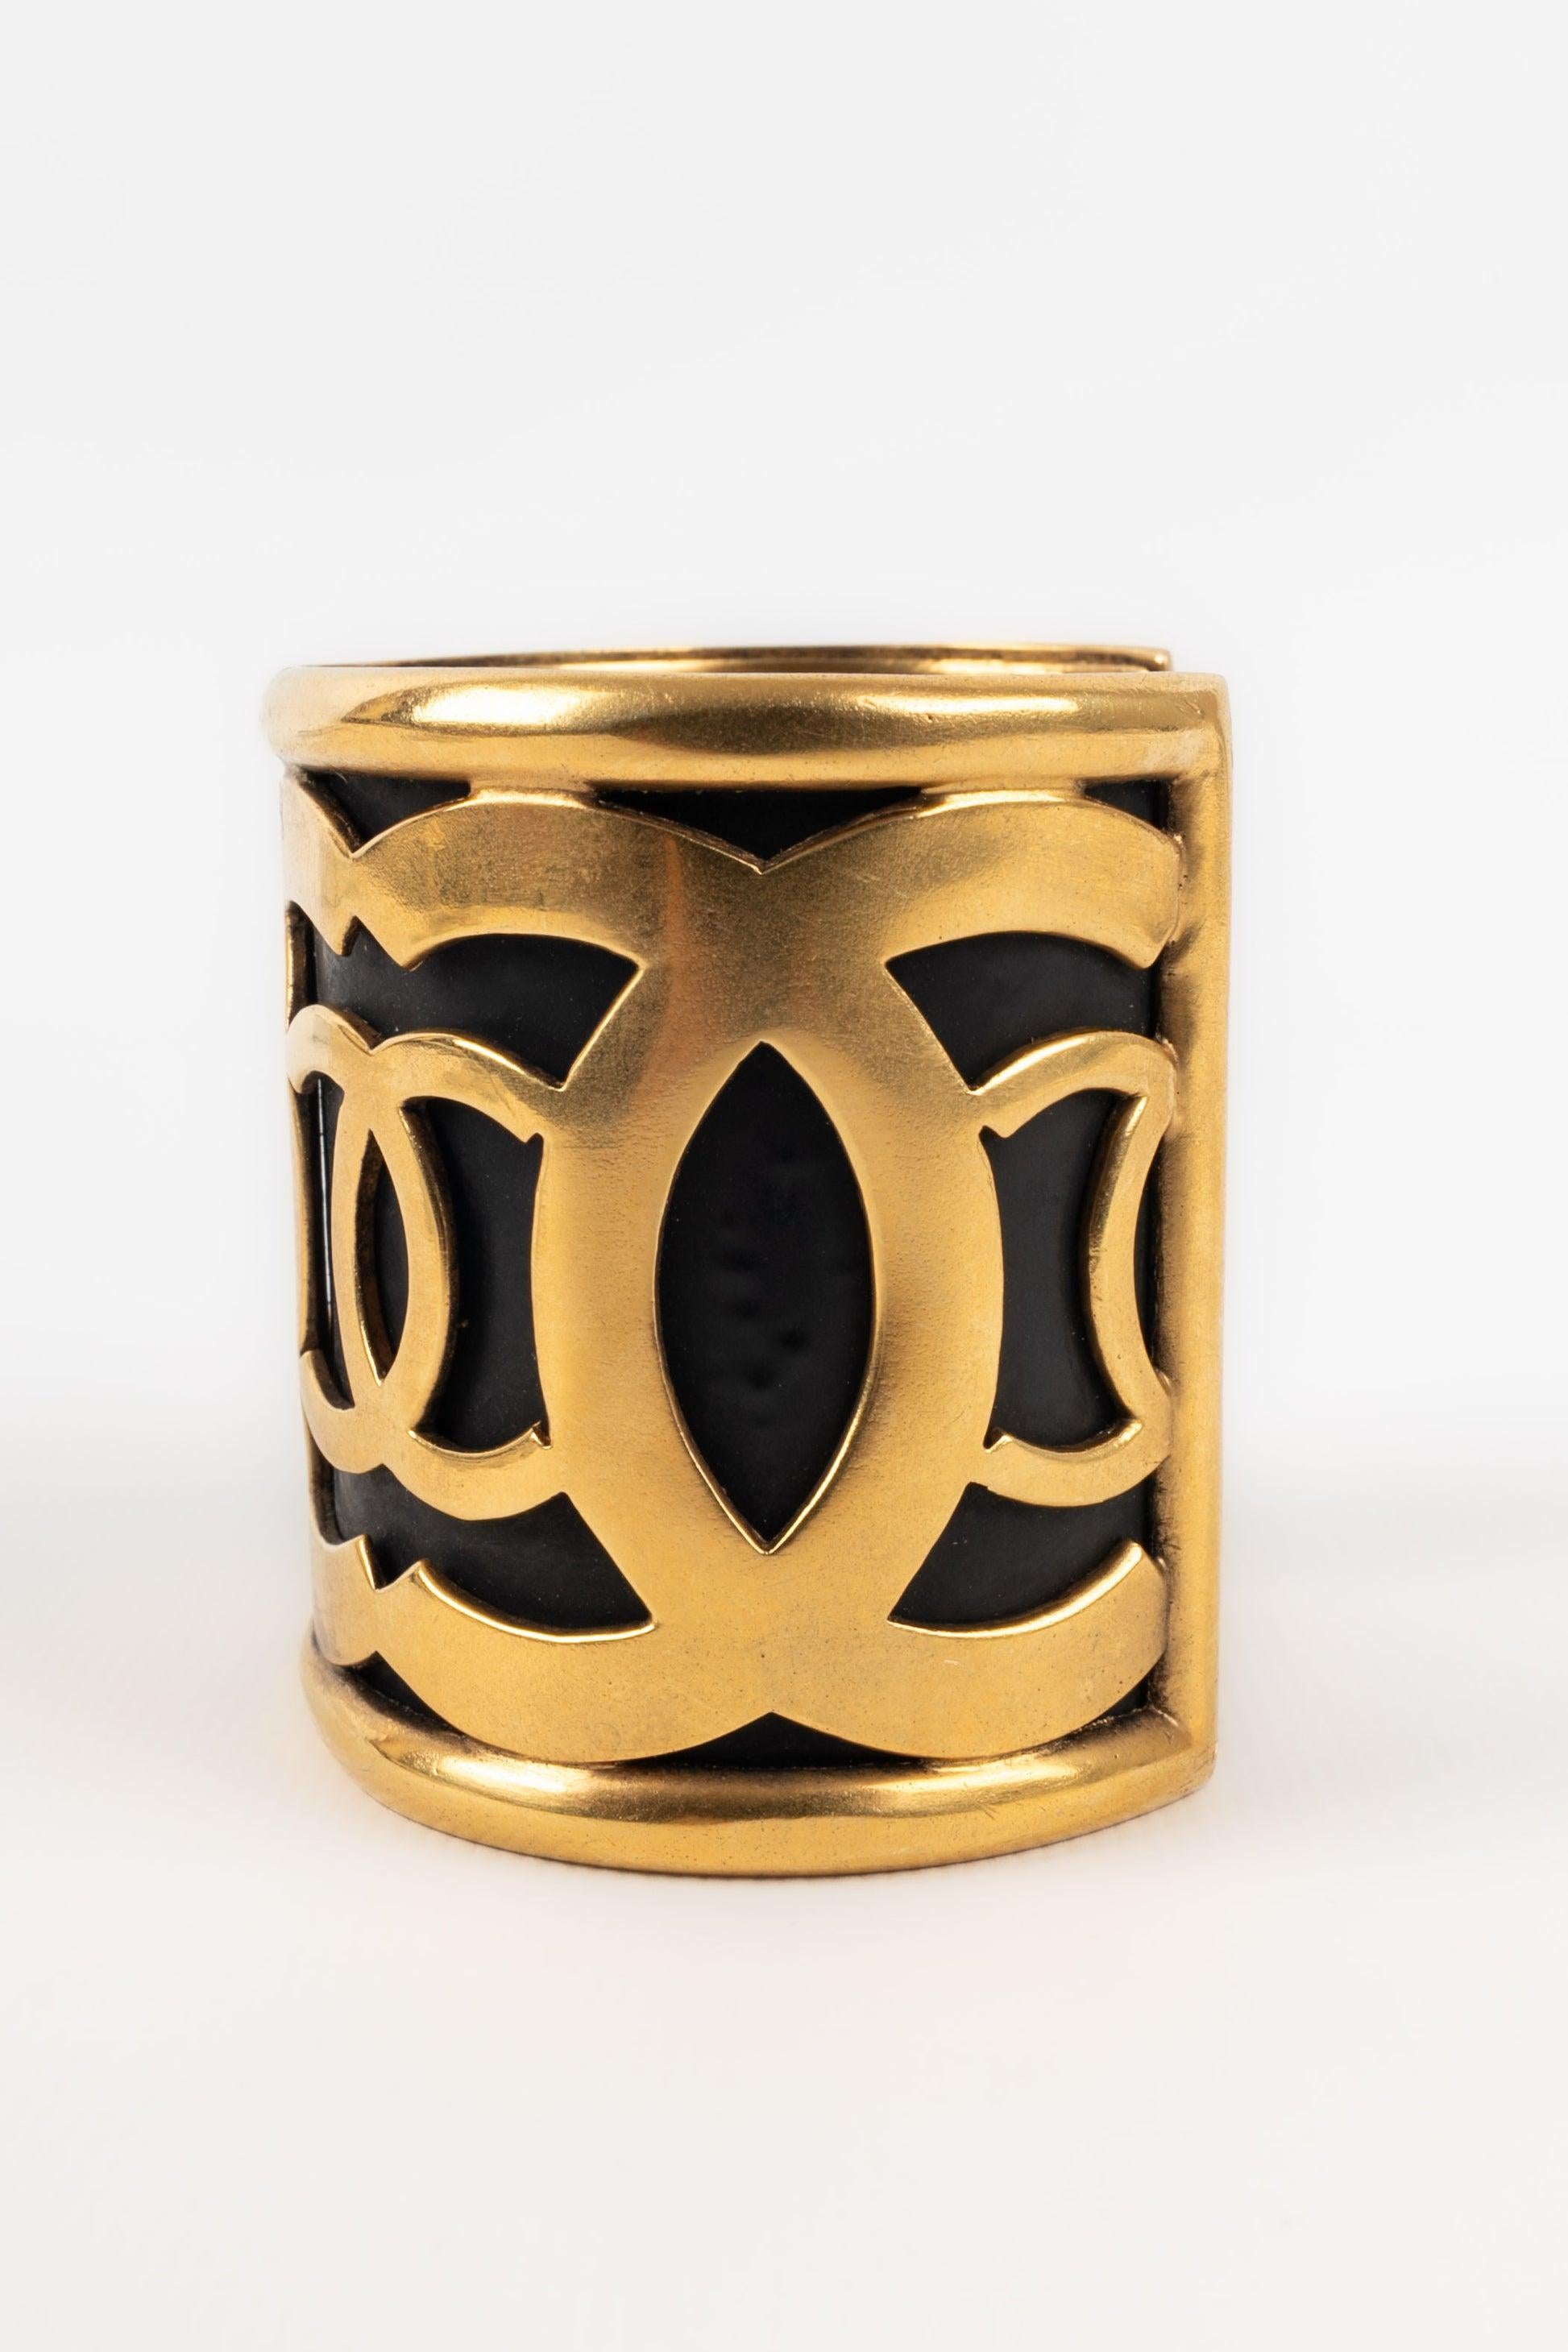 Chanel - Cuff bracelet in golden metal on a black background.

Additional information:
Condition: Very good condition
Dimensions: Height: 6 cm - Length: 14.5 cm - Opening: 3.5 cm

Seller Reference: BRAB141